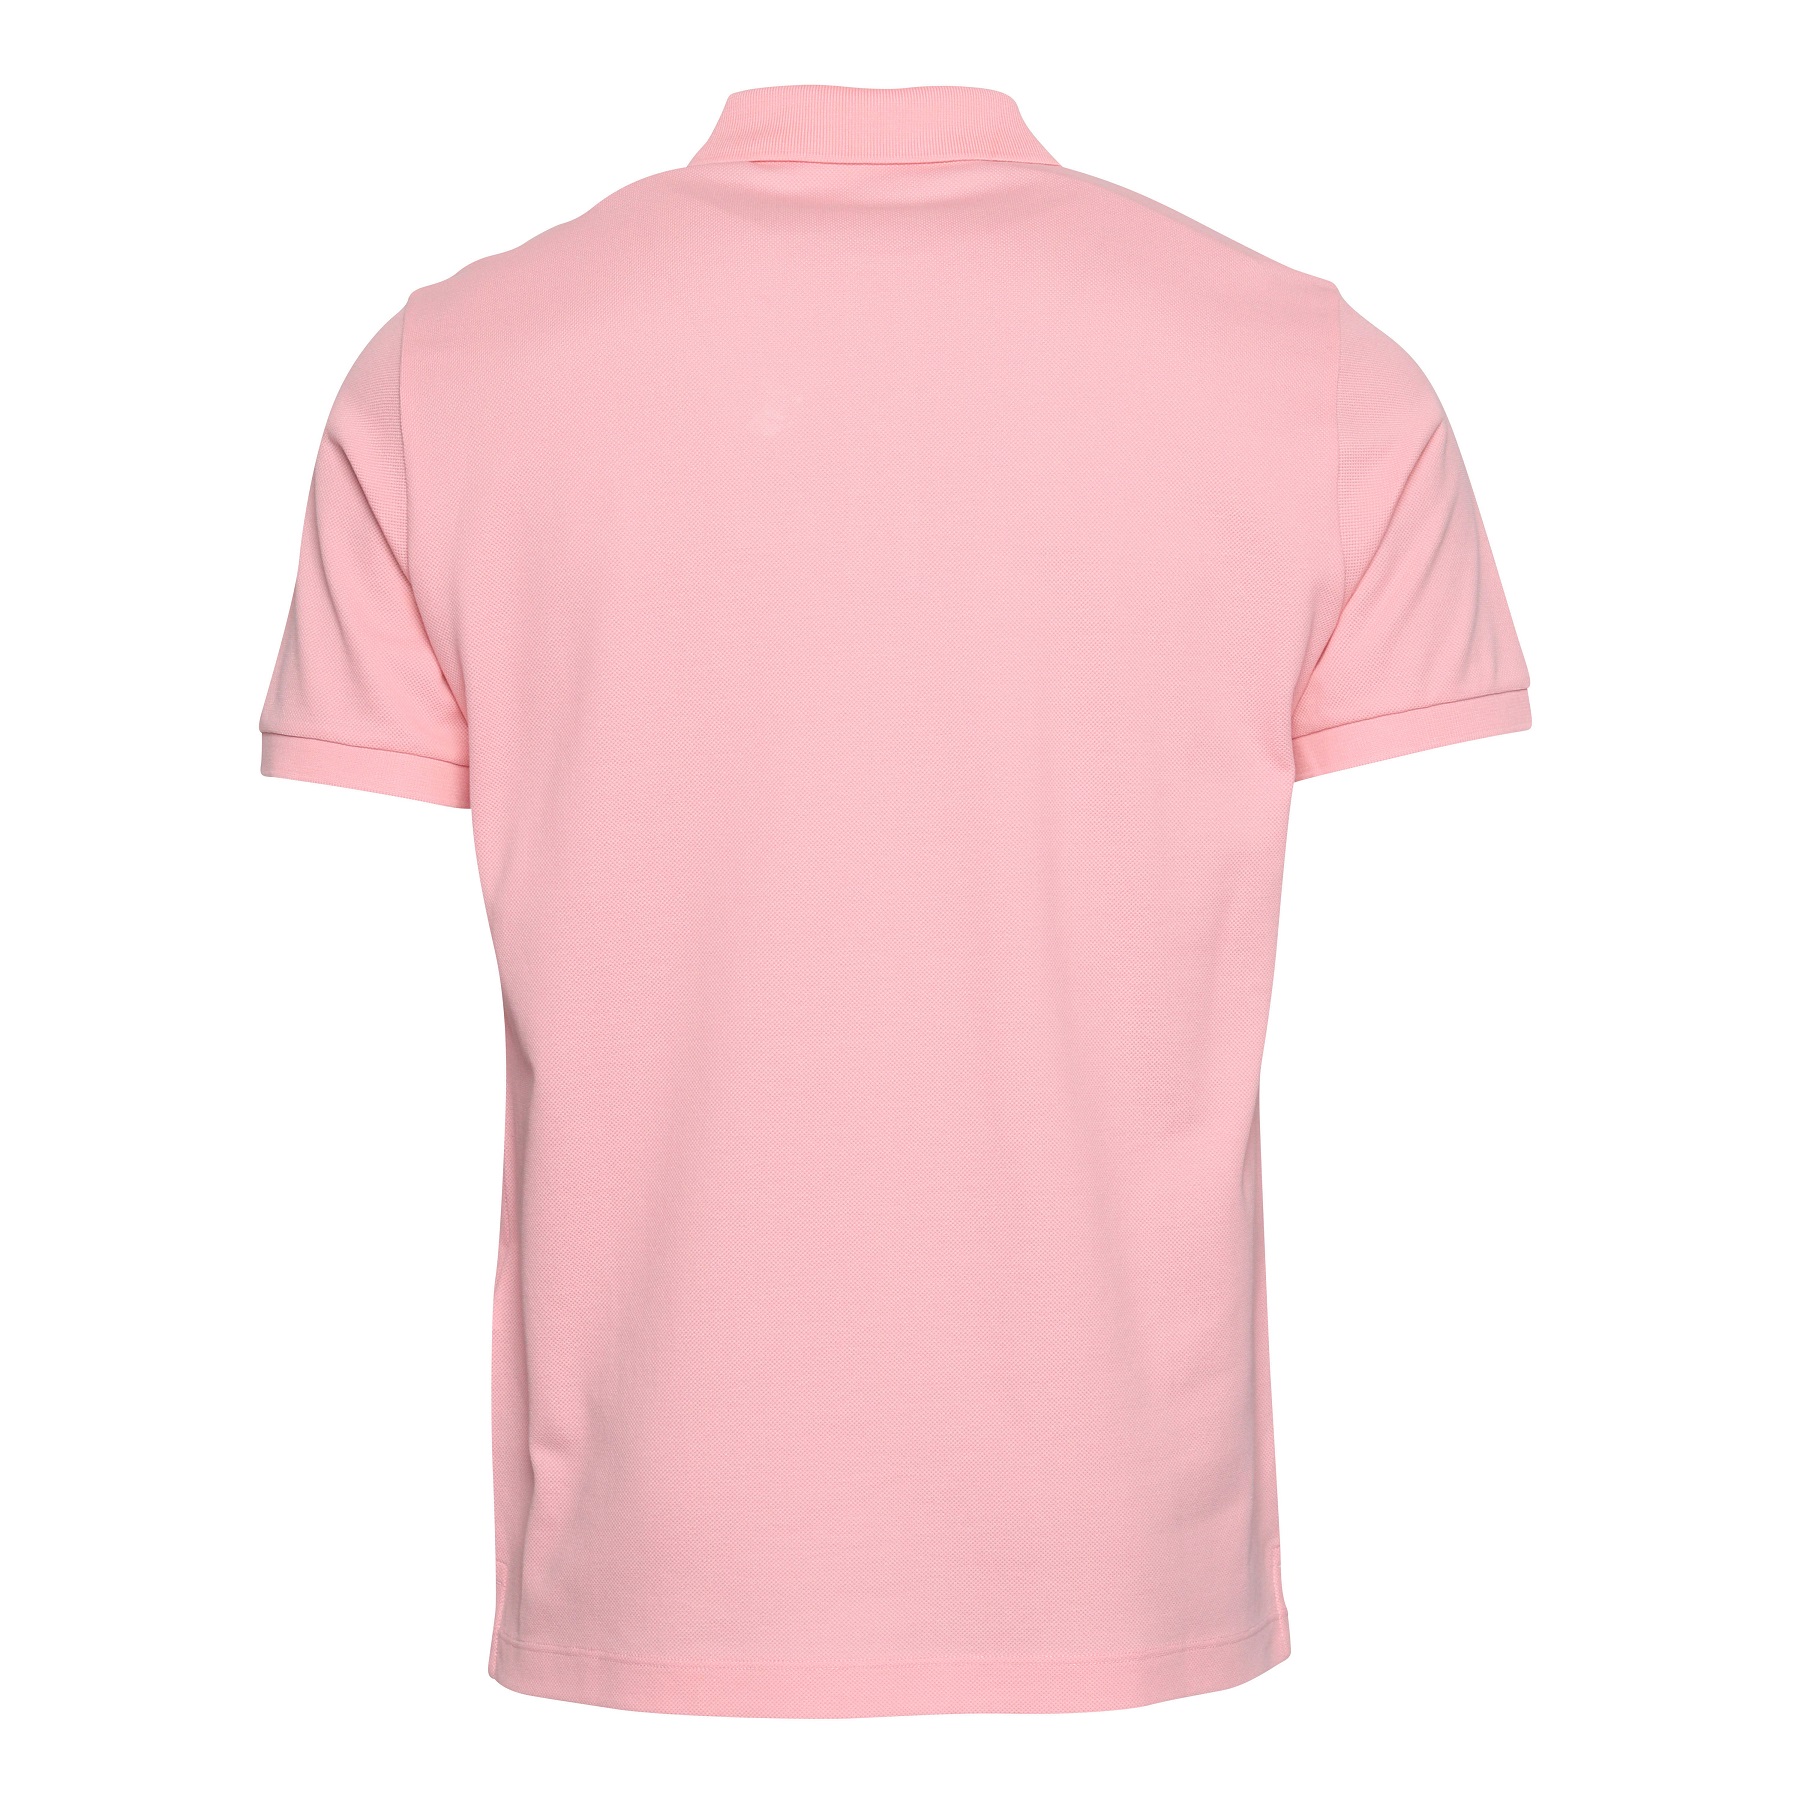 Stone Island Regular Fit Polo Shirt in Pink M